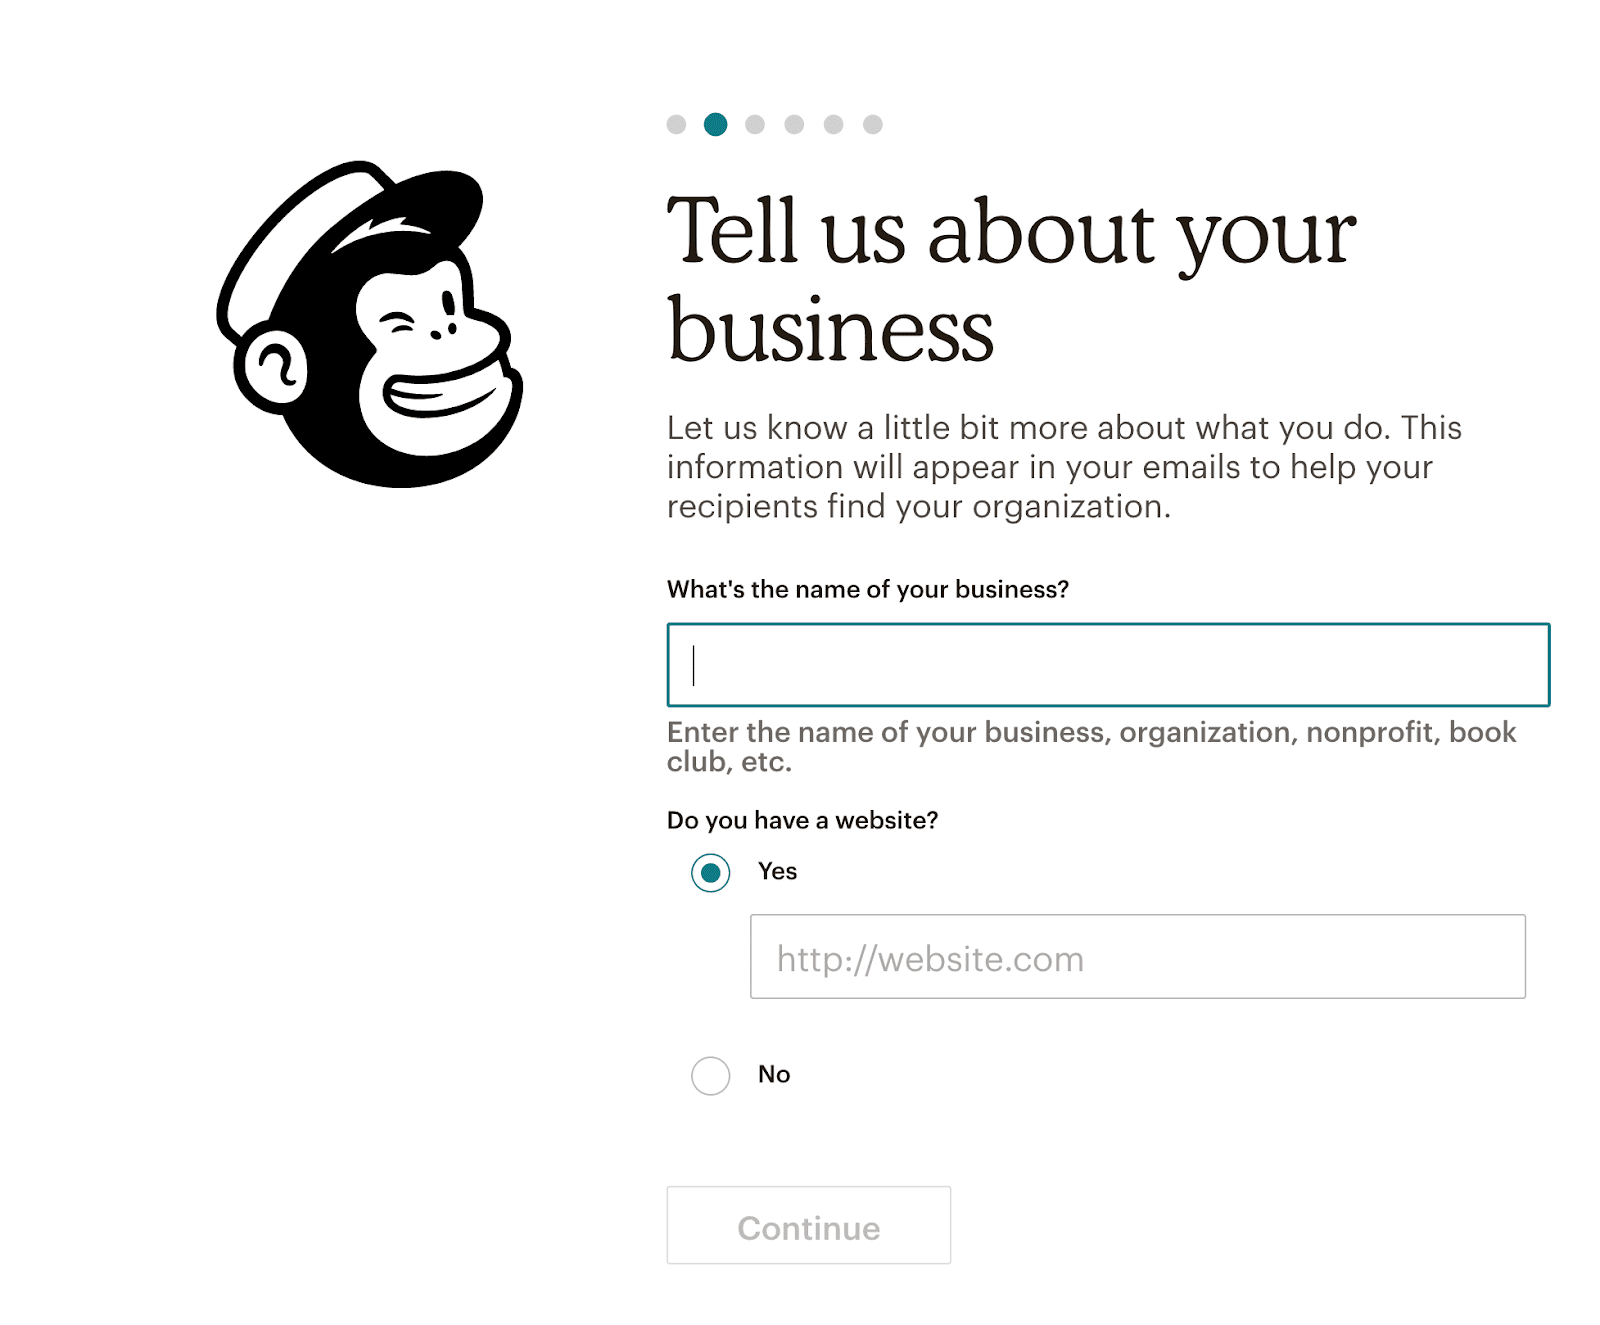 Mailchimp's onboarding experience is almost entirely driven by the copy guiding the user's interactions with the site.